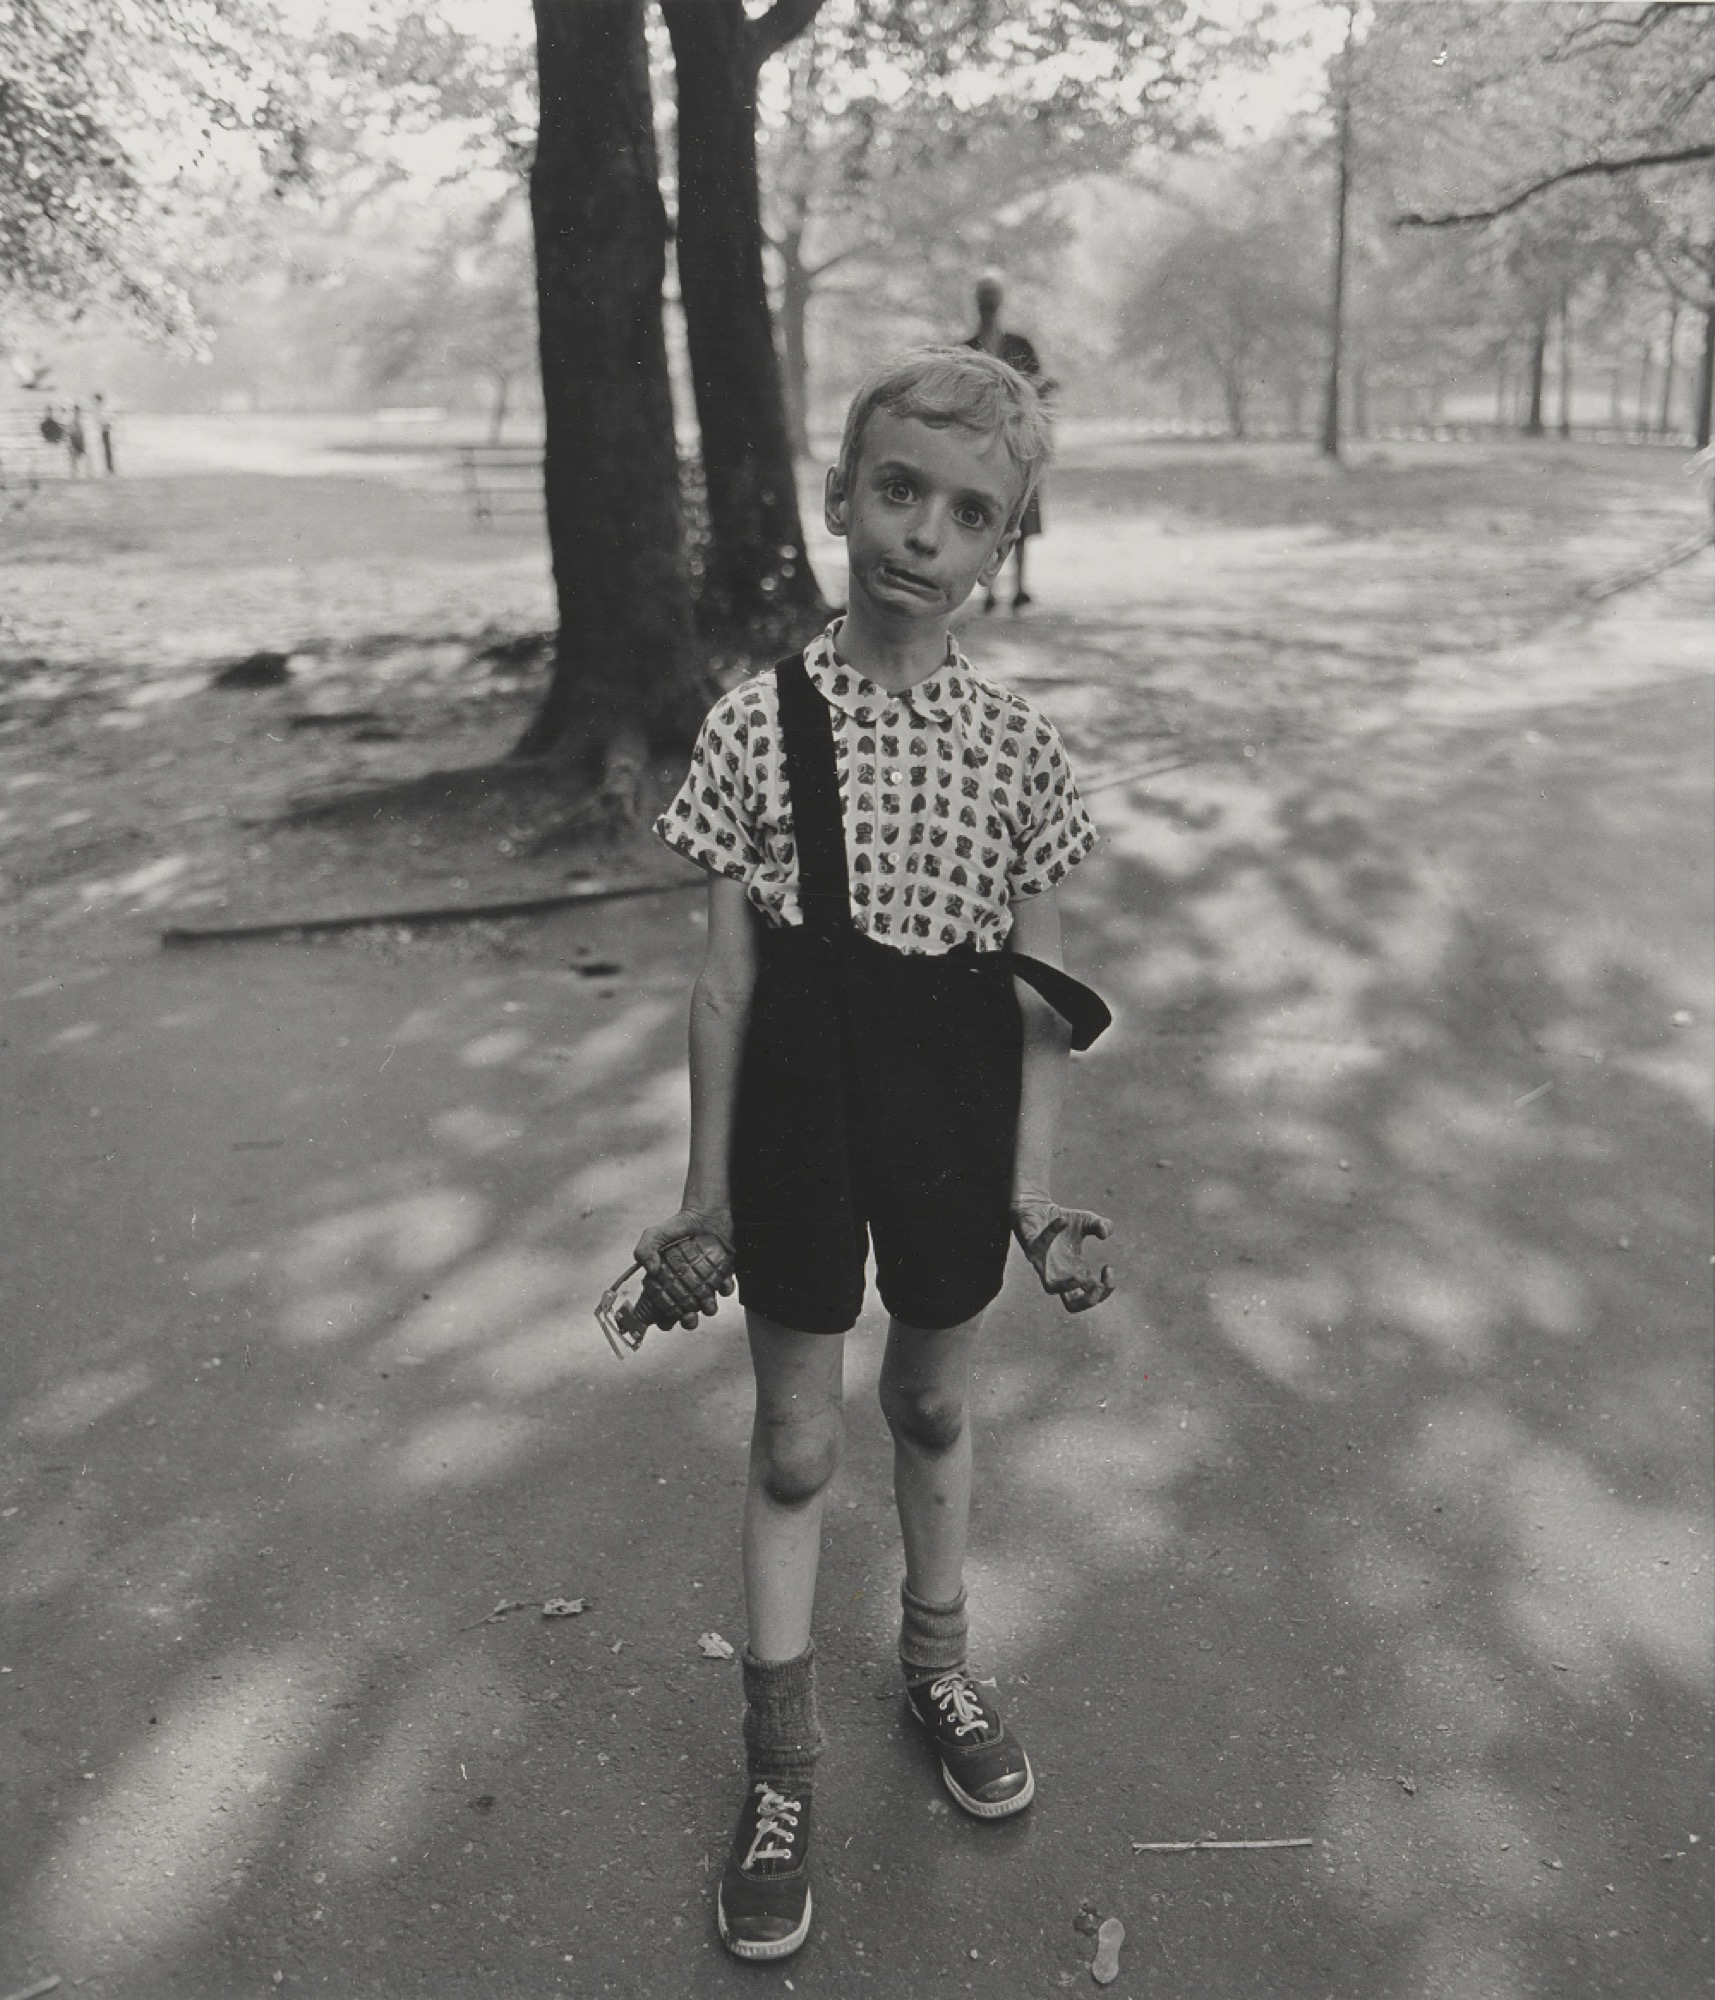 Diane Arbus, <em>Child with toy hand grenade, in Central Park, New York City</em>, 1962, gelatin silver photograph, National Gallery of Australia, Canberra, Purchased 1980.